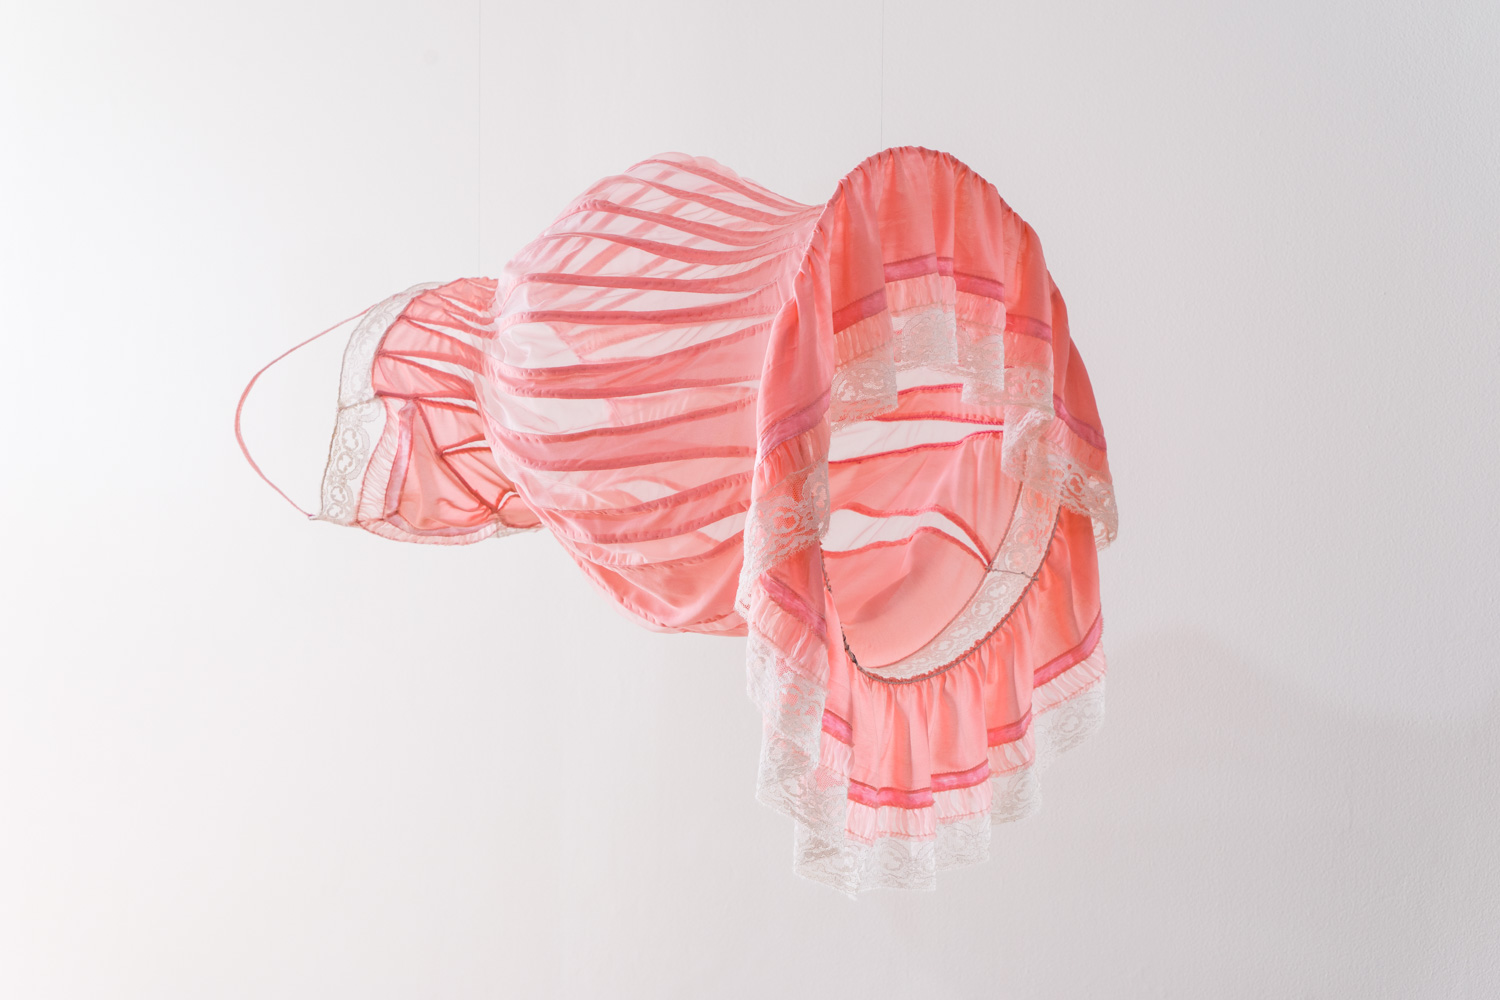   Distended nightie in pink , 2018, found nightie and synthetic fabric, milliner’s wire, thread. 69 x 44 x 53cm 